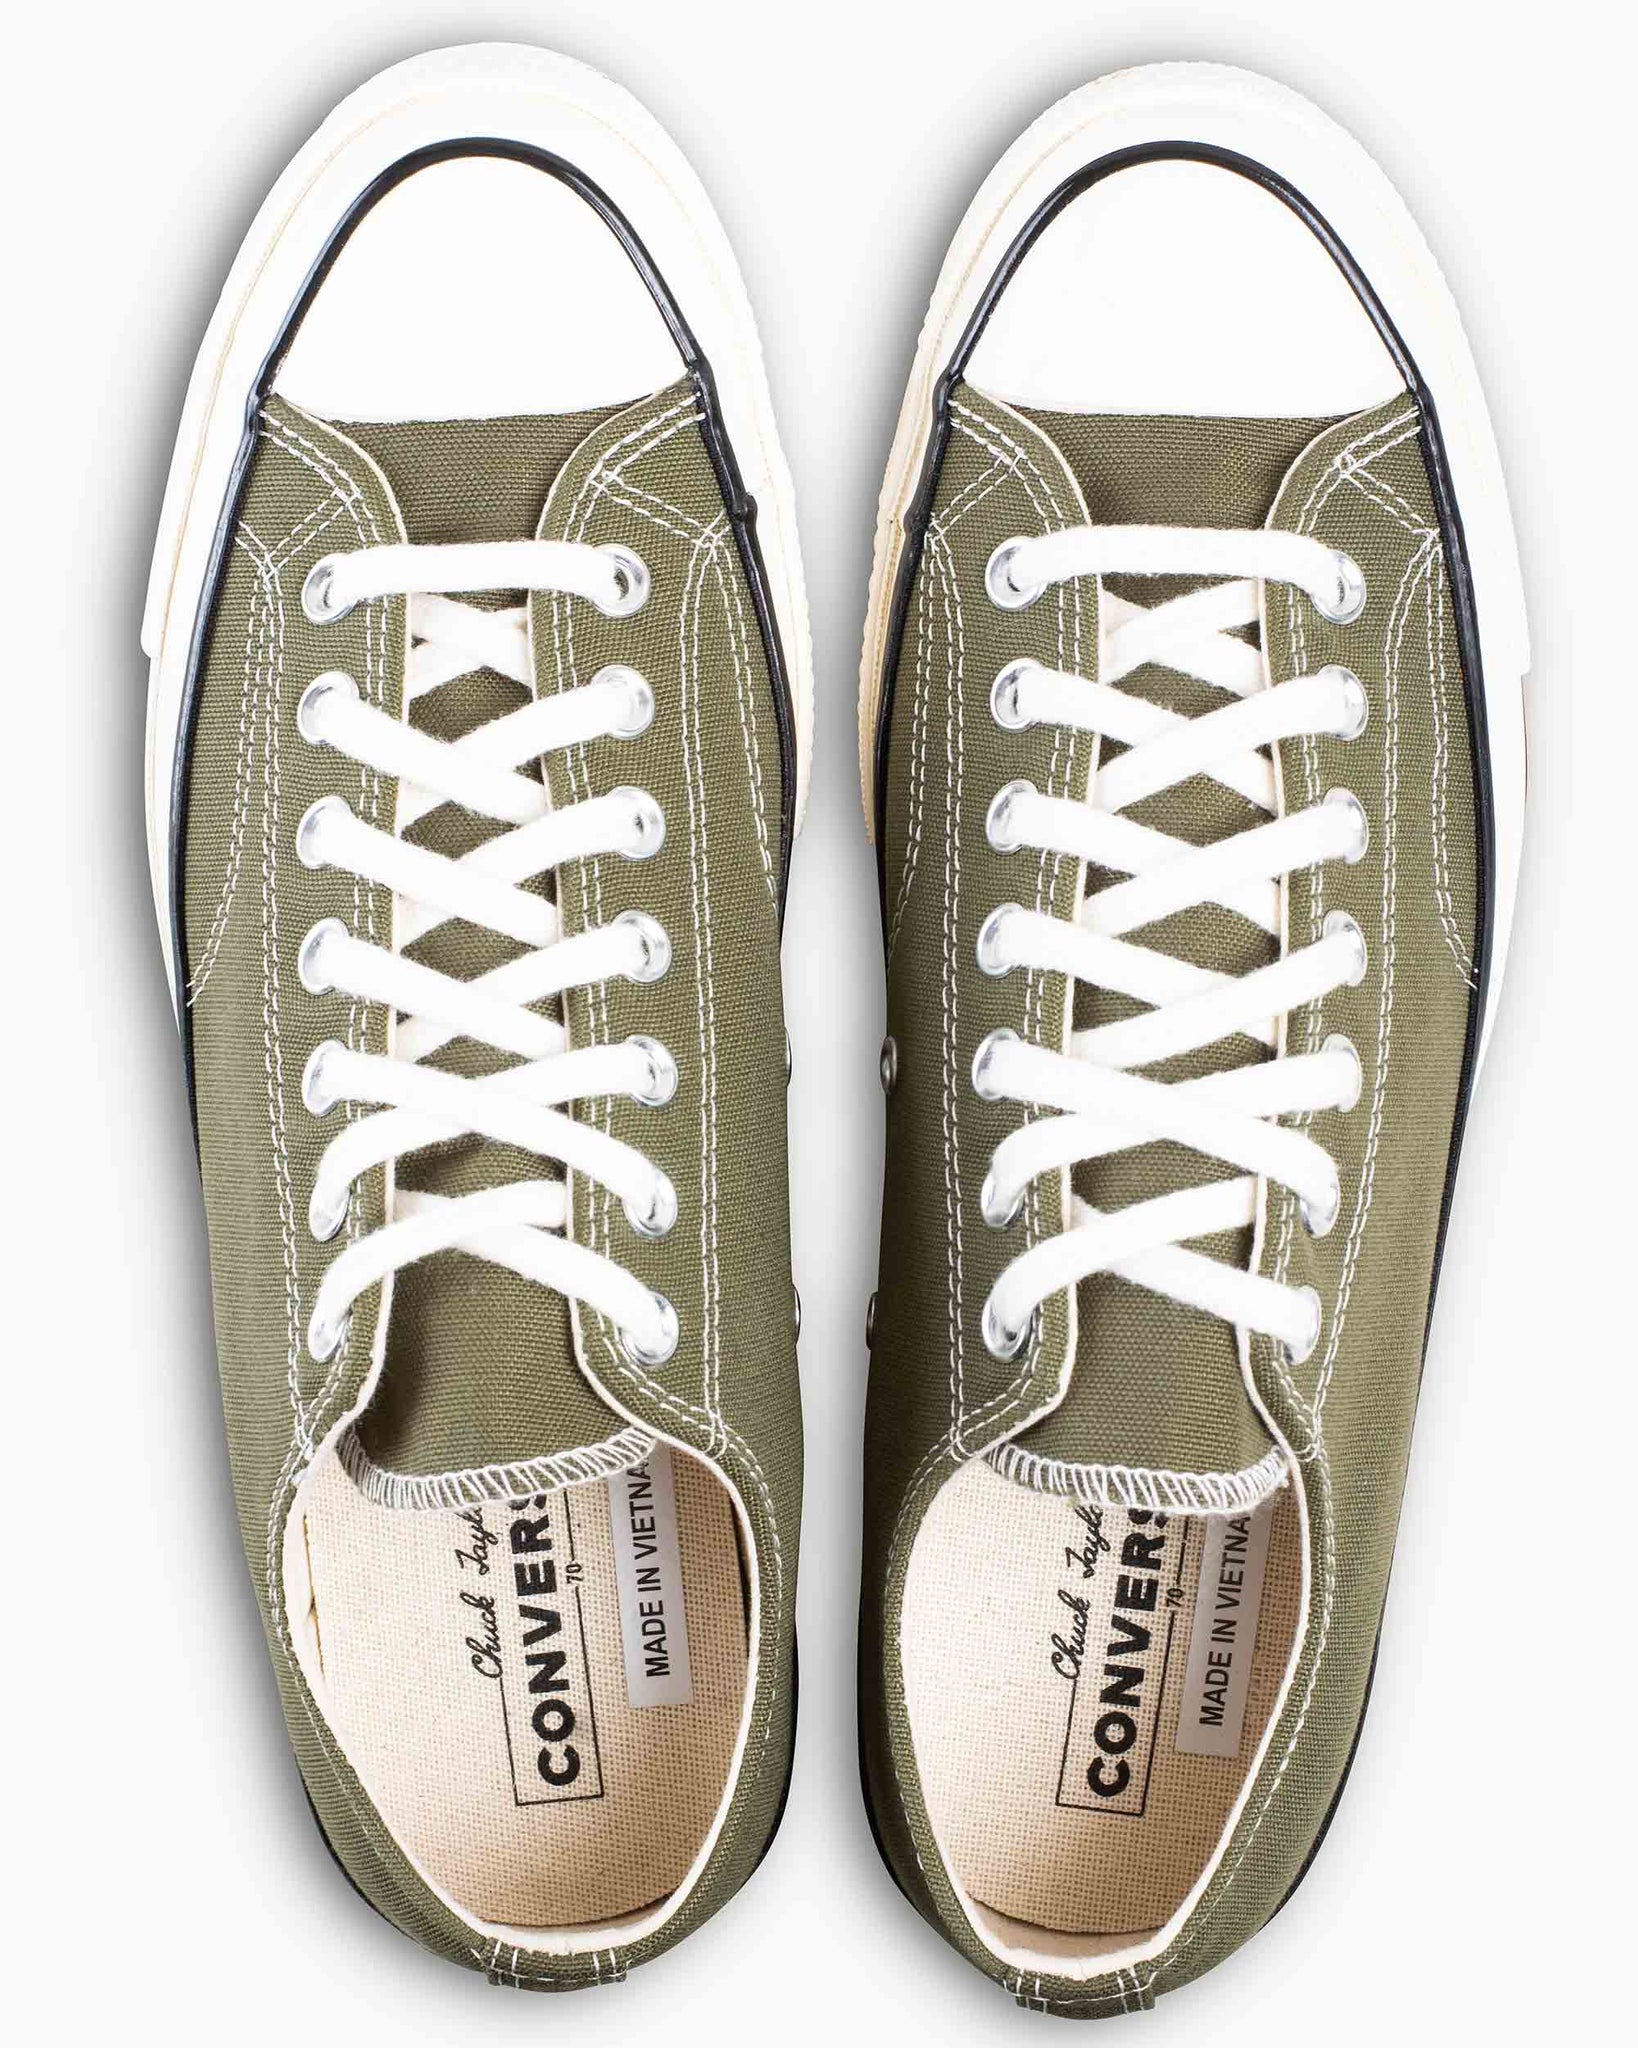 Converse CT 1970s Ox Utility A00757C Top